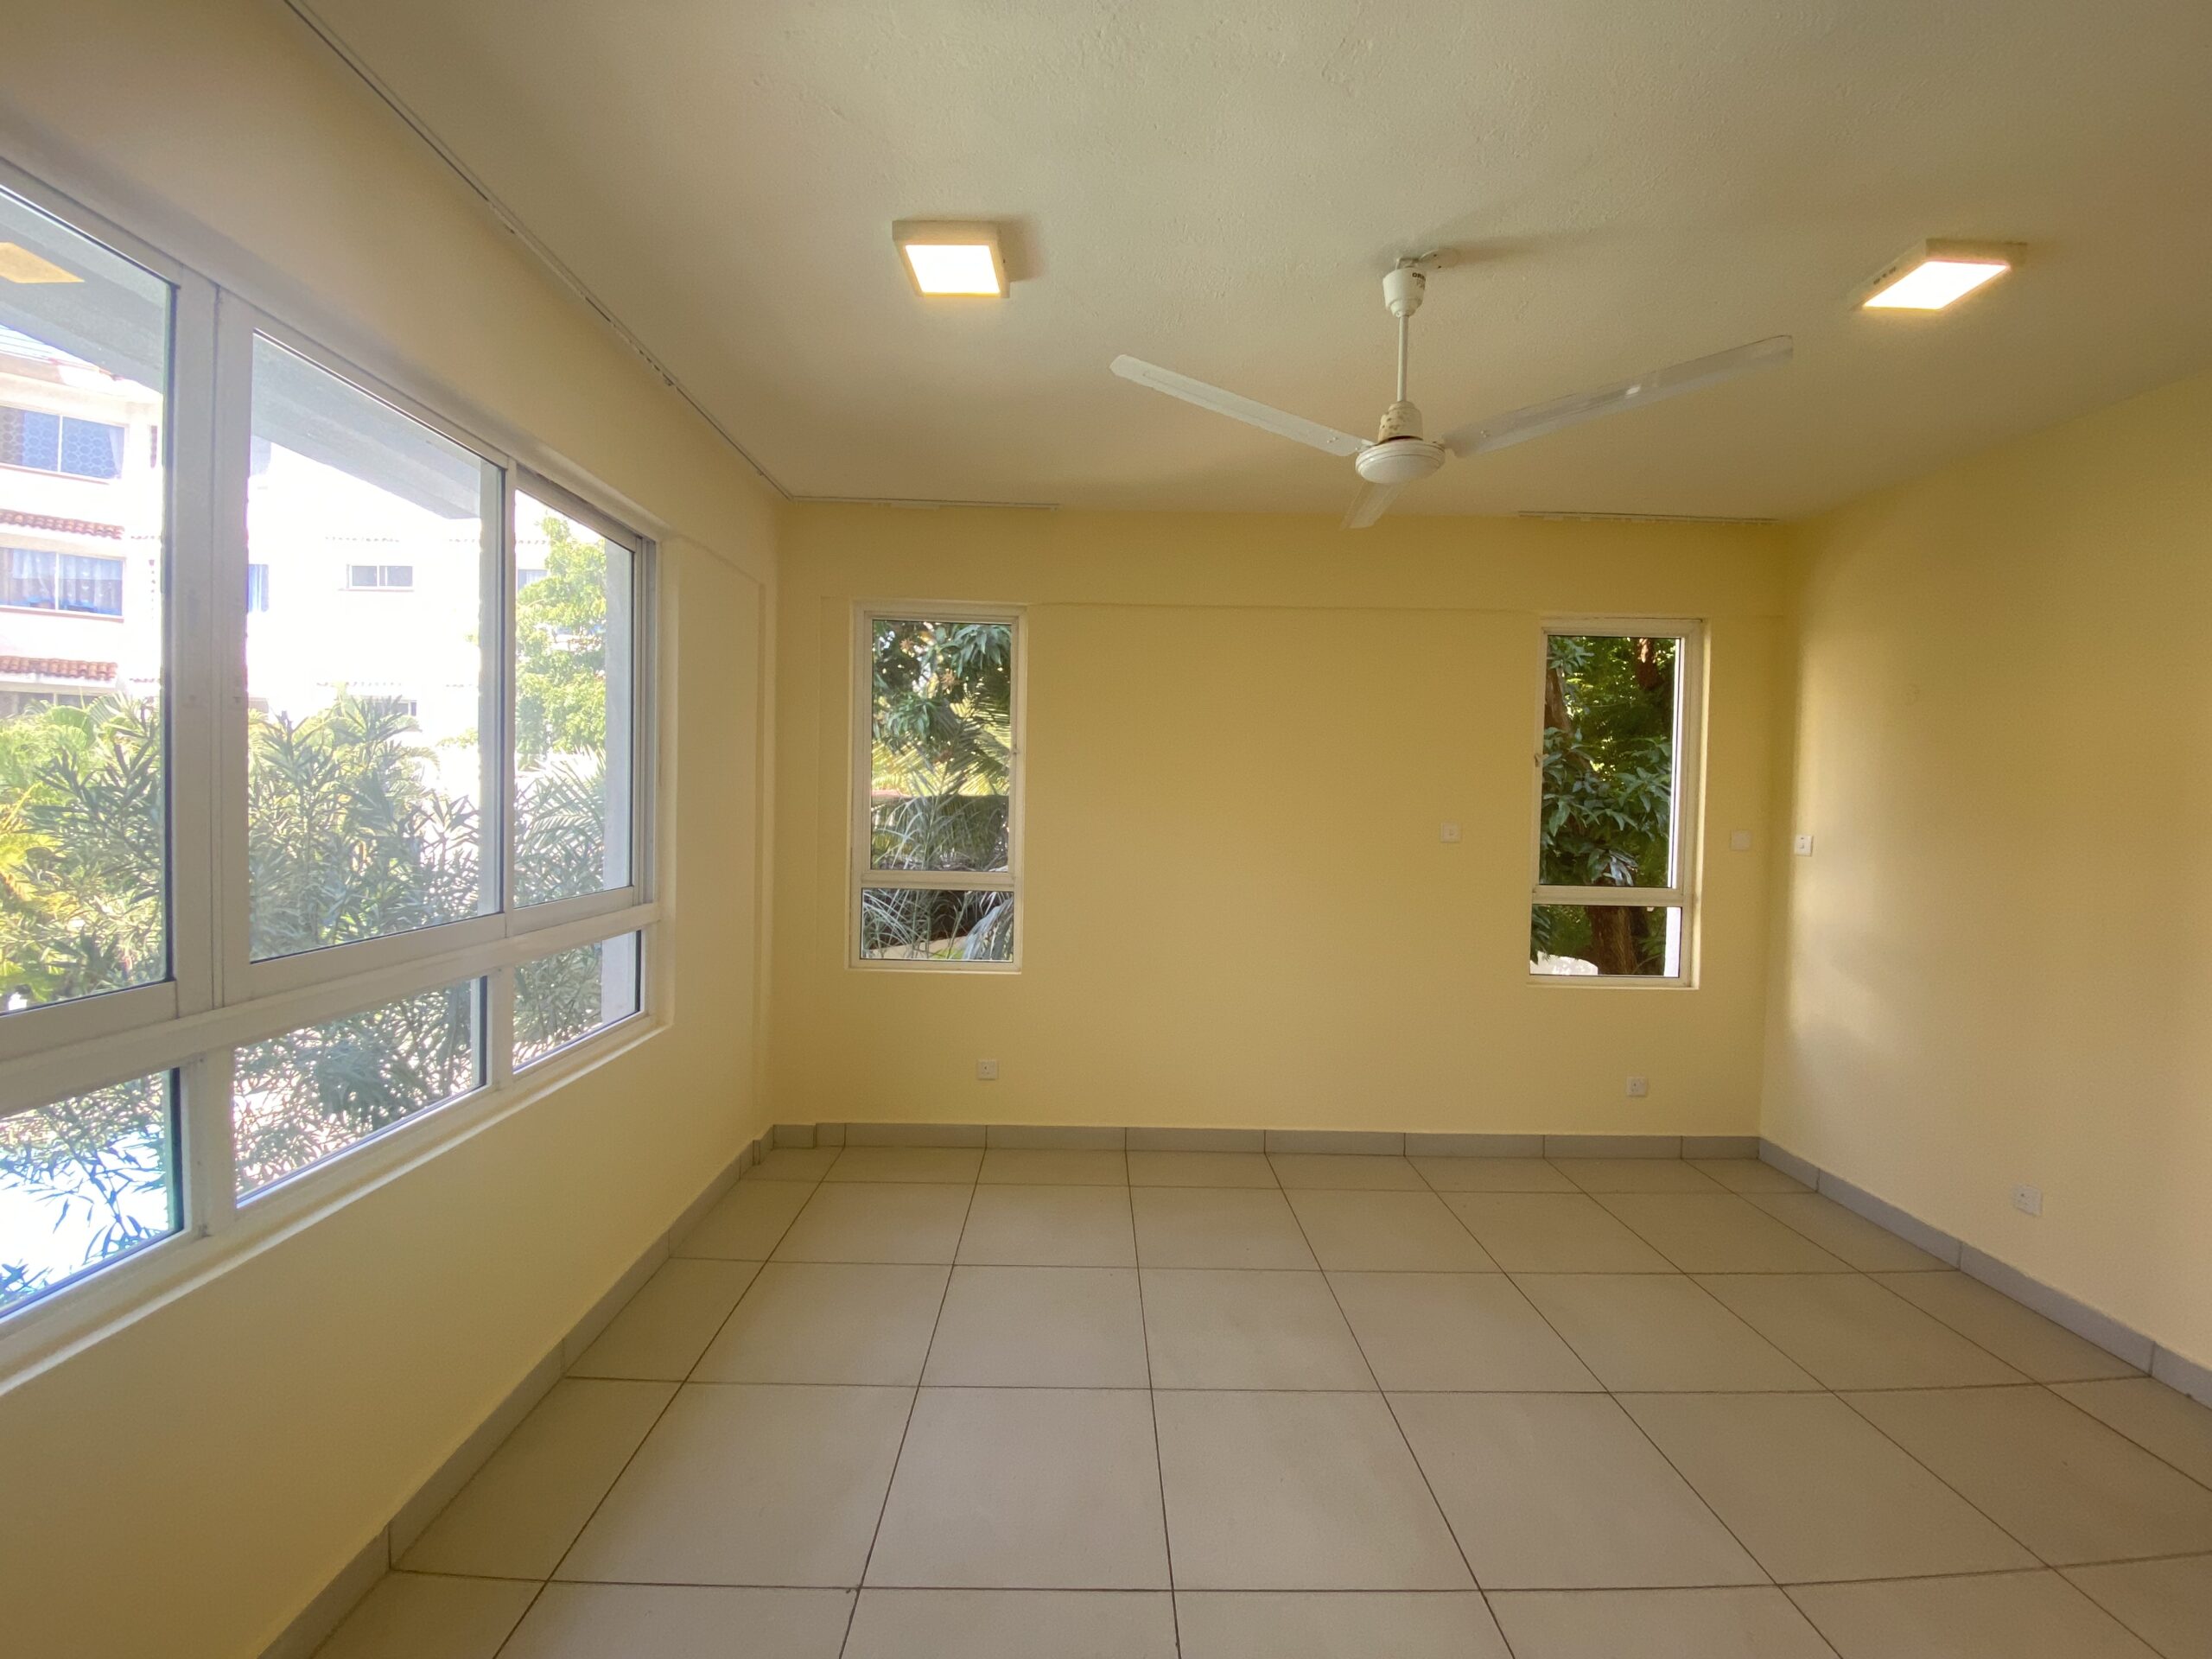 Newly Renovated Modern 4 Bedroom Apartment In Mombasa-Nyali For Rent-110K- Ref-769